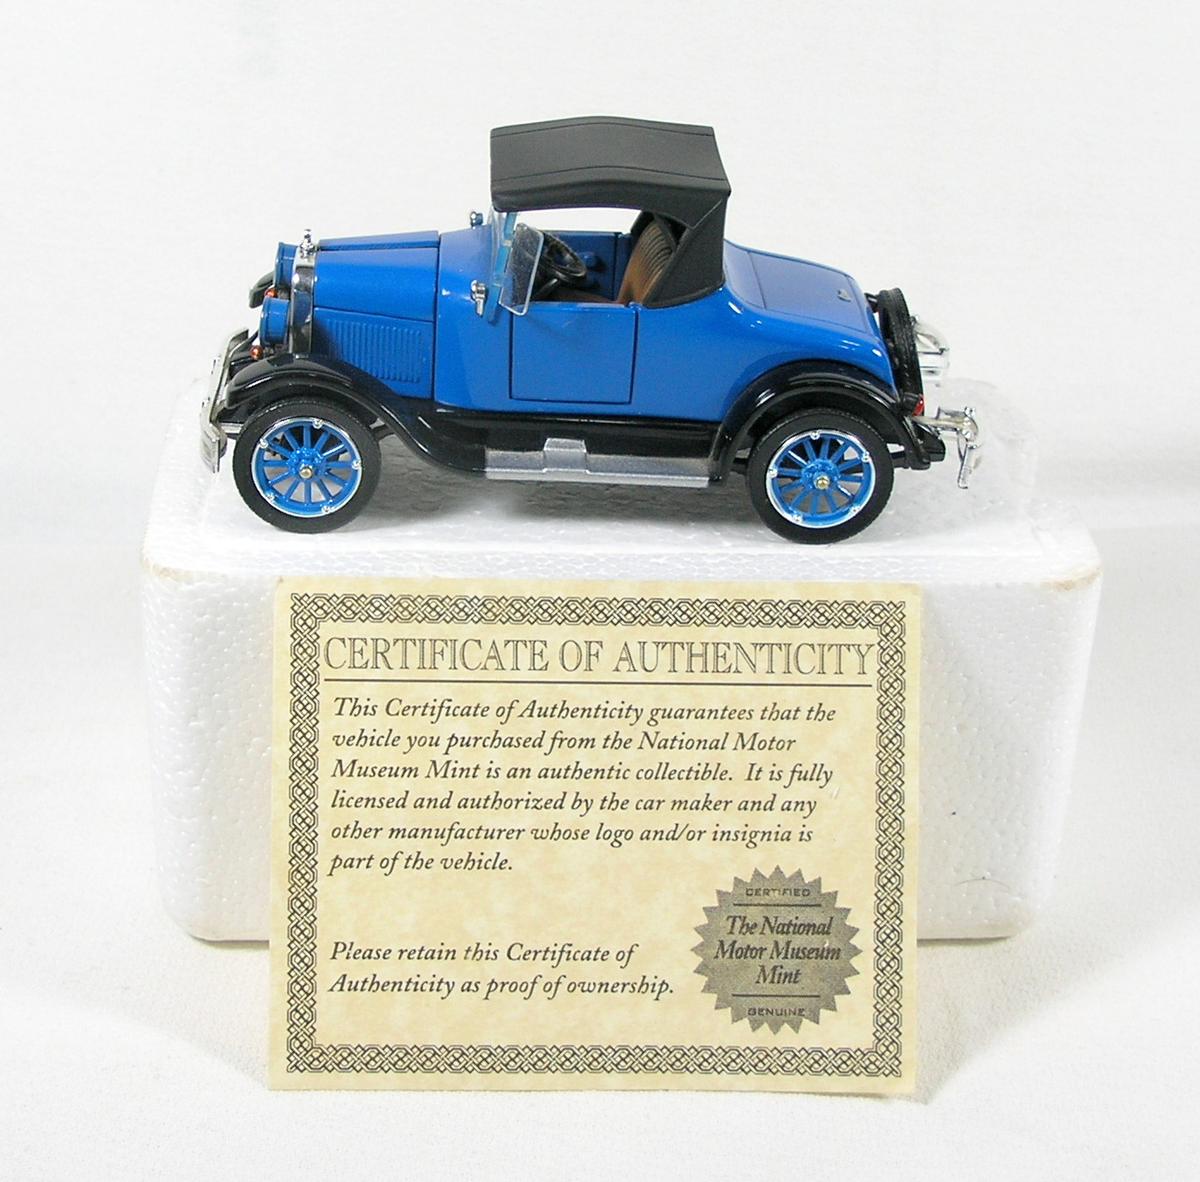 Diecast Replica of 1925 Chevy Series K Superior Roadster From National Moto